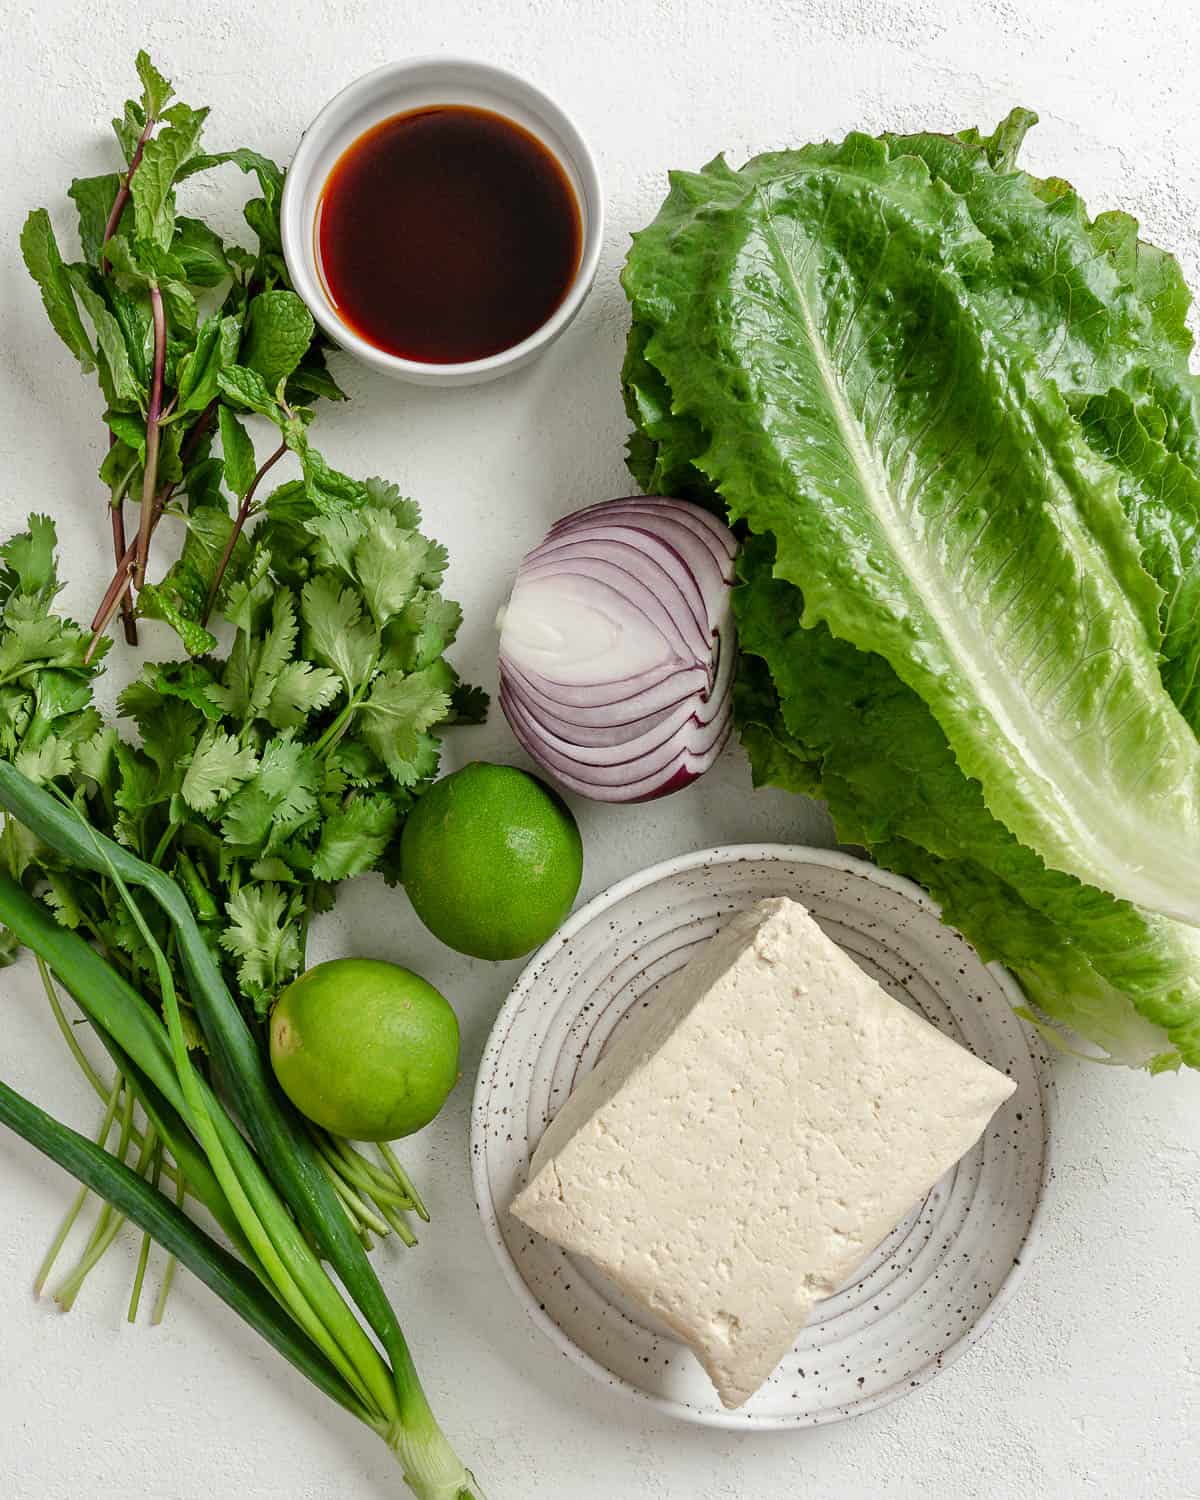 ingredients for larb salad measured out against a white surface